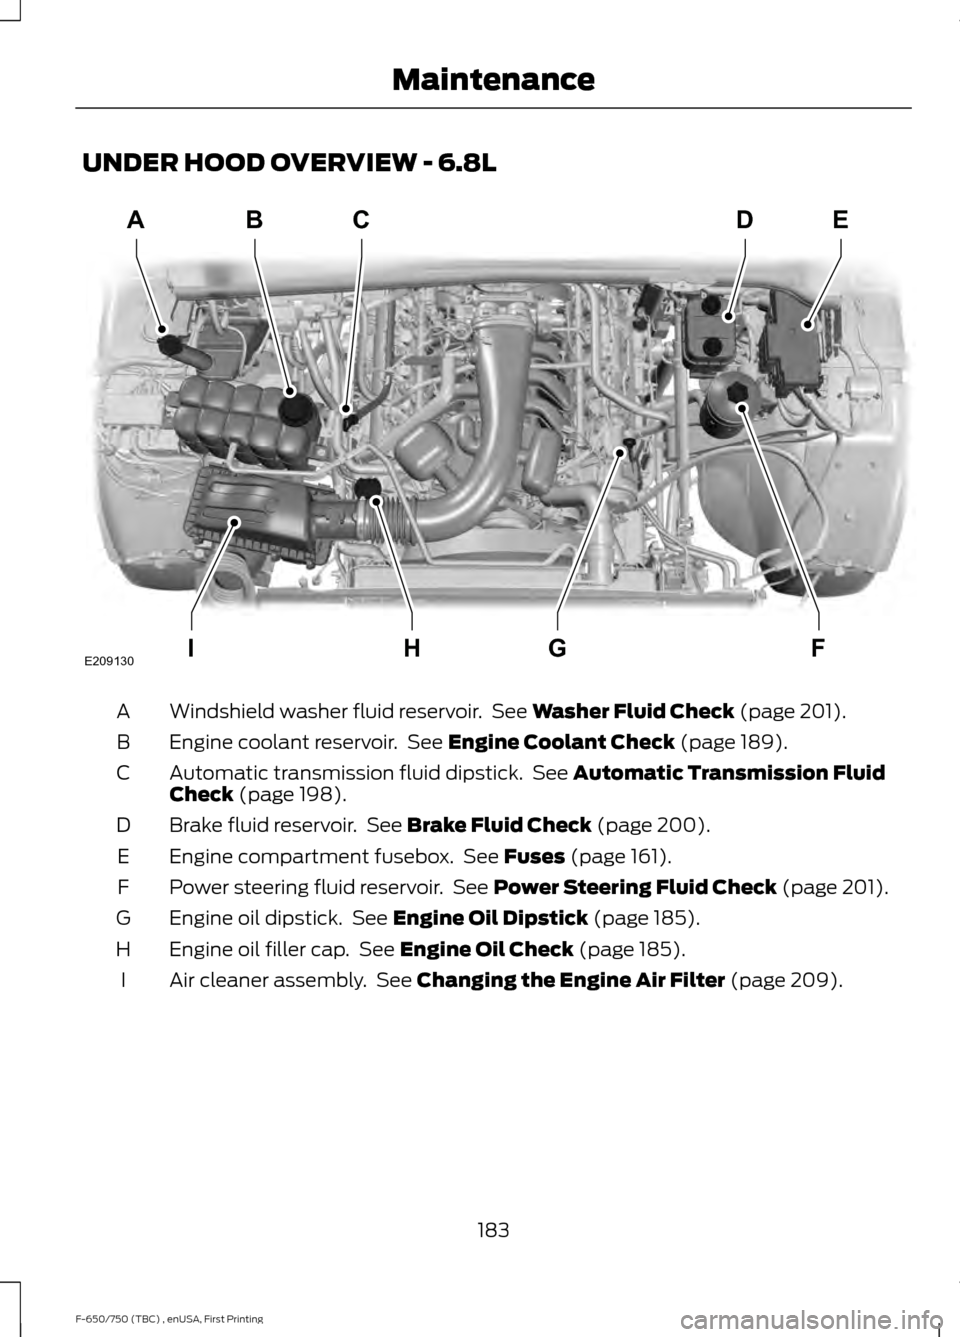 FORD F750 2017 13.G Owners Manual UNDER HOOD OVERVIEW - 6.8L
Windshield washer fluid reservoir.  See Washer Fluid Check (page 201).
A
Engine coolant reservoir.  See 
Engine Coolant Check (page 189).
B
Automatic transmission fluid dips